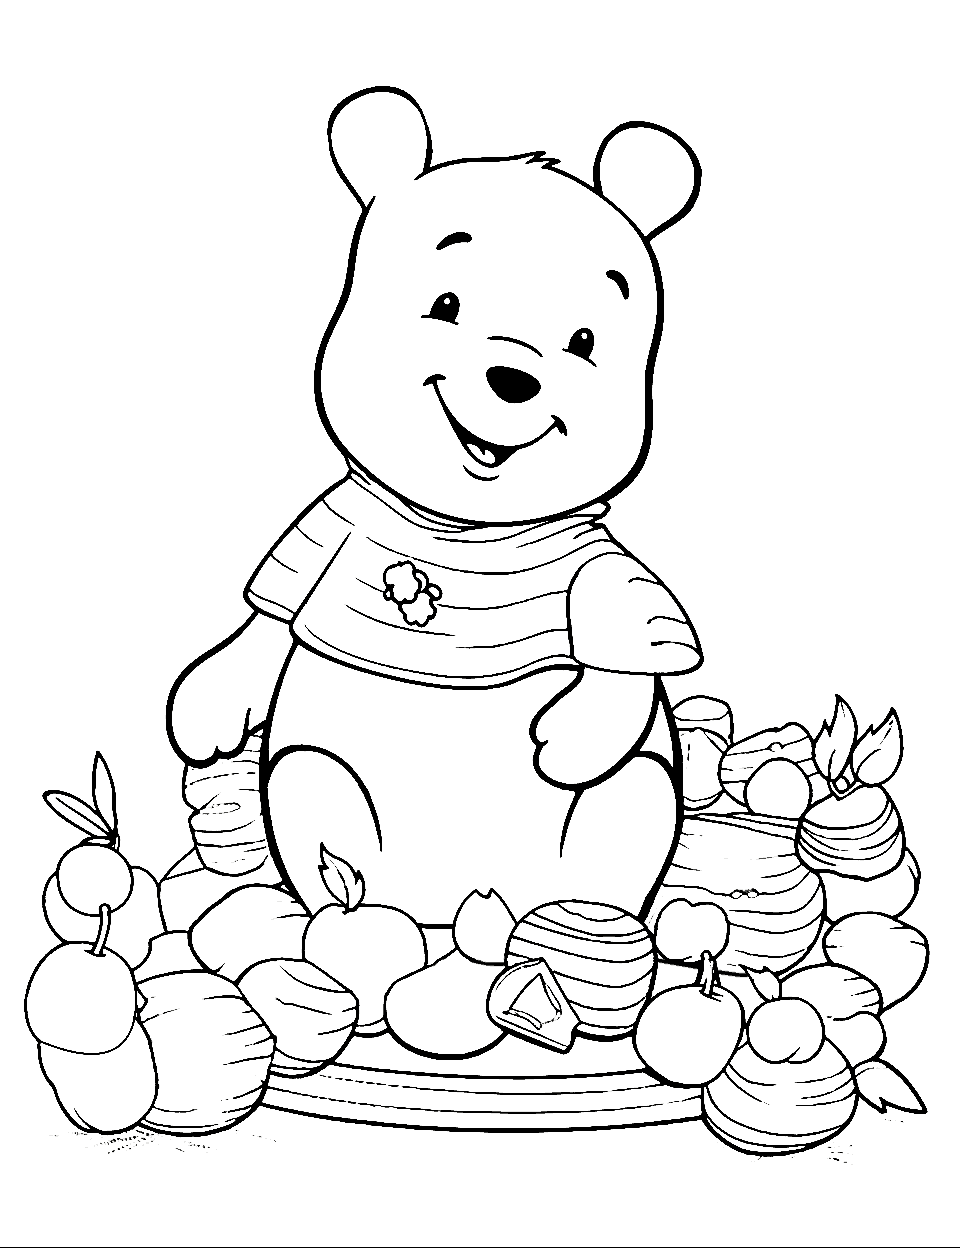 Thanksgiving Feast Coloring Page - Pooh Bear with Thanksgiving treats.